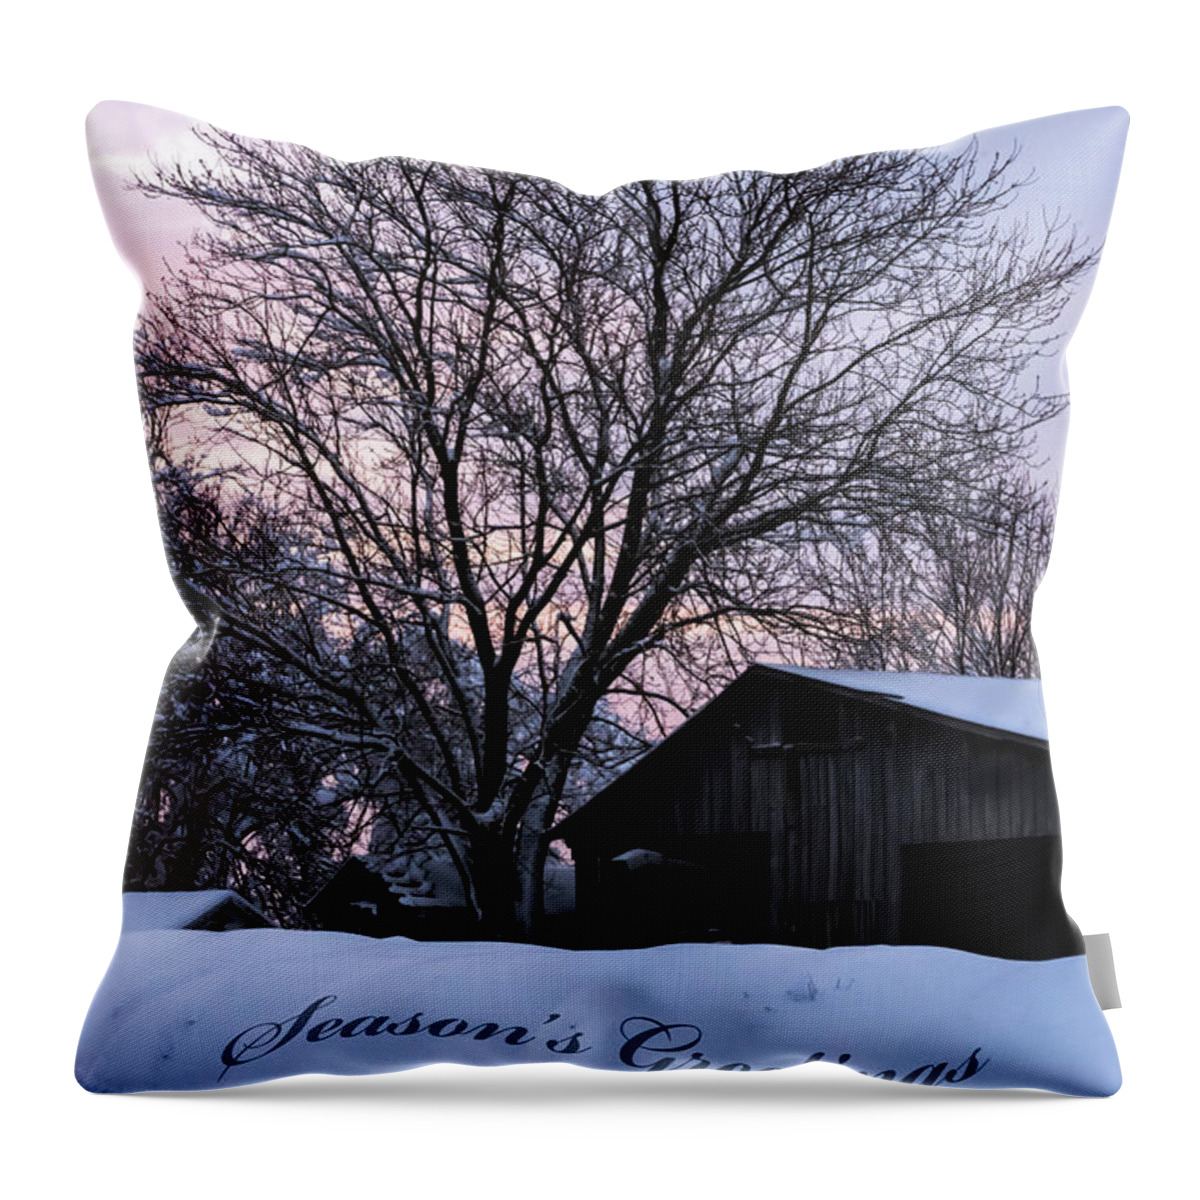 Farm Throw Pillow featuring the photograph Season's Greetings - Farm by Holden The Moment